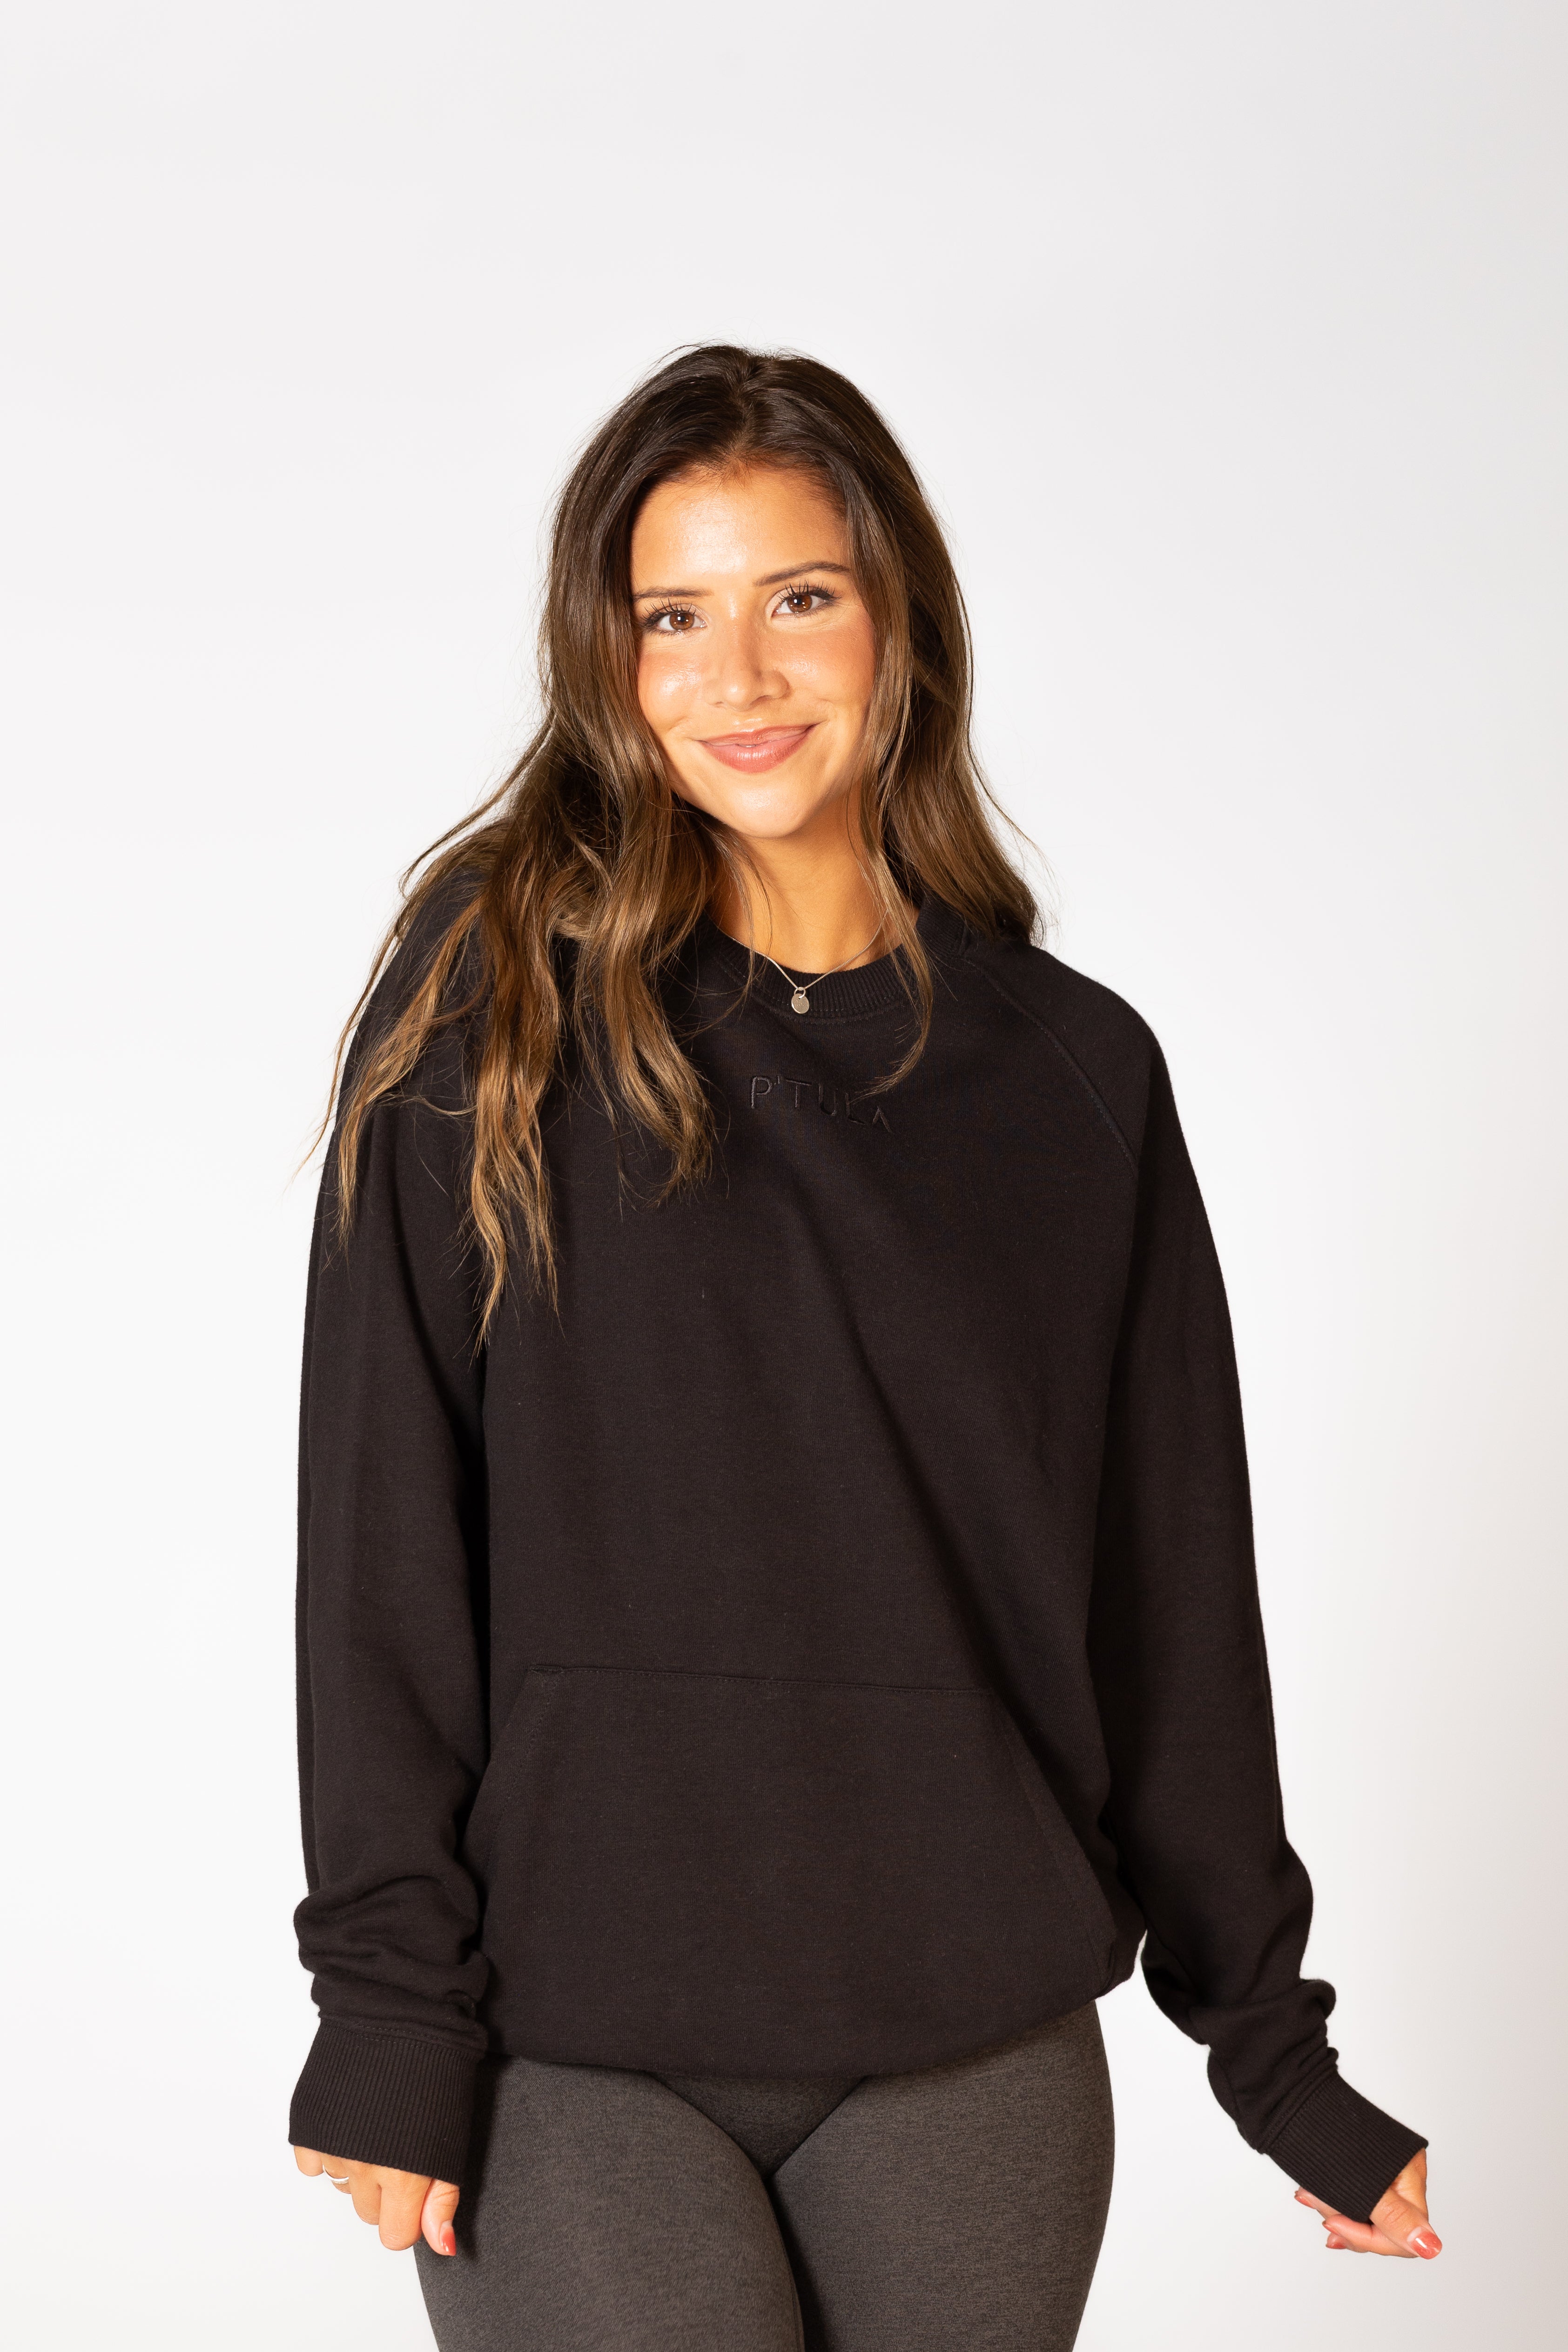 The Perfectly Imperfect Lightweight Lounge Crew - Black